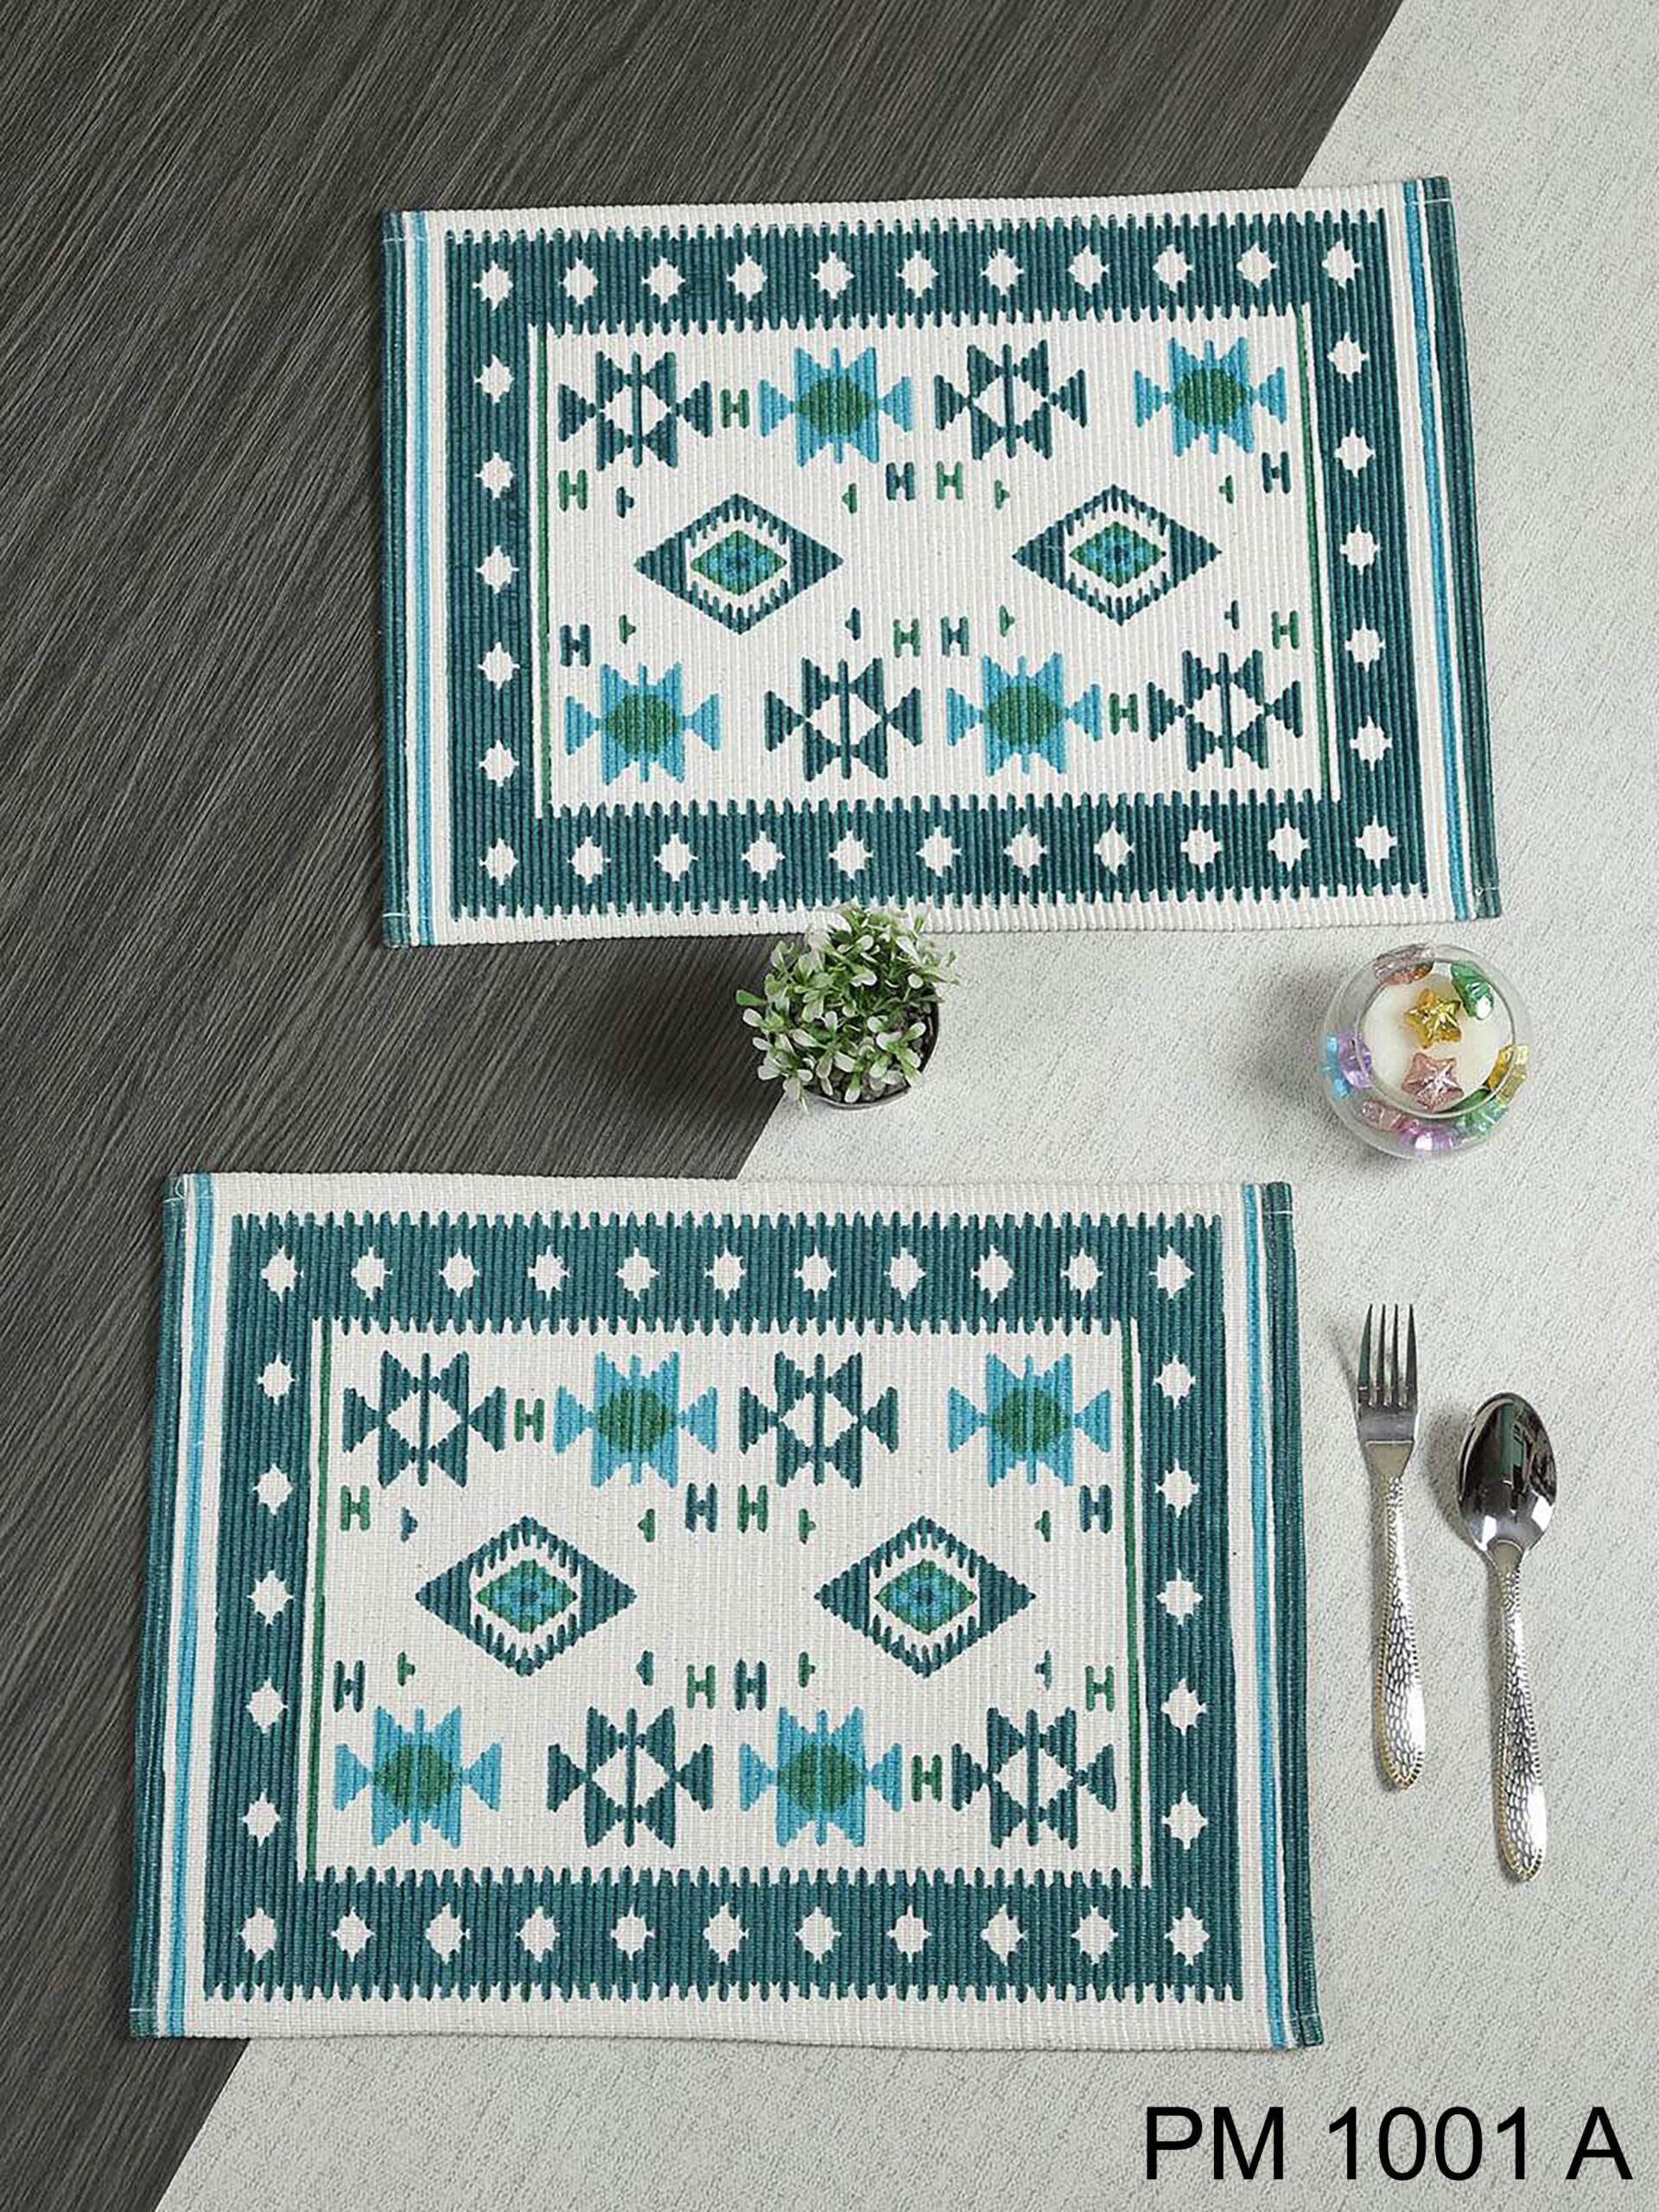 https://soumyafurnishings.in/wp-content/uploads/2023/05/PM-1001-A-WOVEN-RIBBED-PRINTED-PLACE-MATS-scaled.jpg